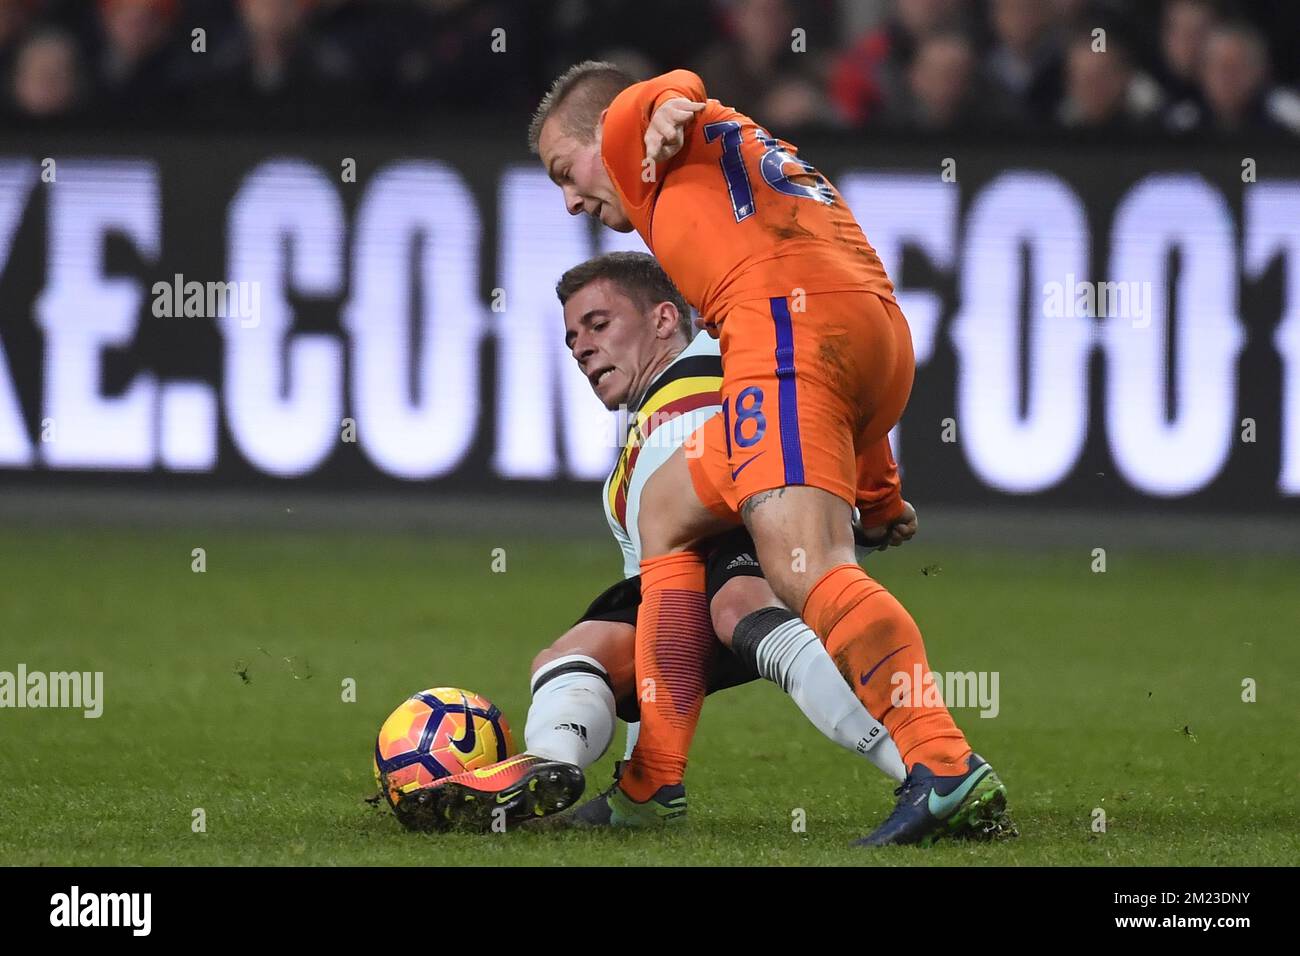 Belgium's Thorgan Hazard and Netherland's Jordy Clasie fight for the ball during a friendly game of Belgian national soccer team Red Devils against the Netherlands, on Wednesday 09 November 2016, in Amsterdam, Netherlands.  BELGA PHOTO DIRK WAEM Stock Photo